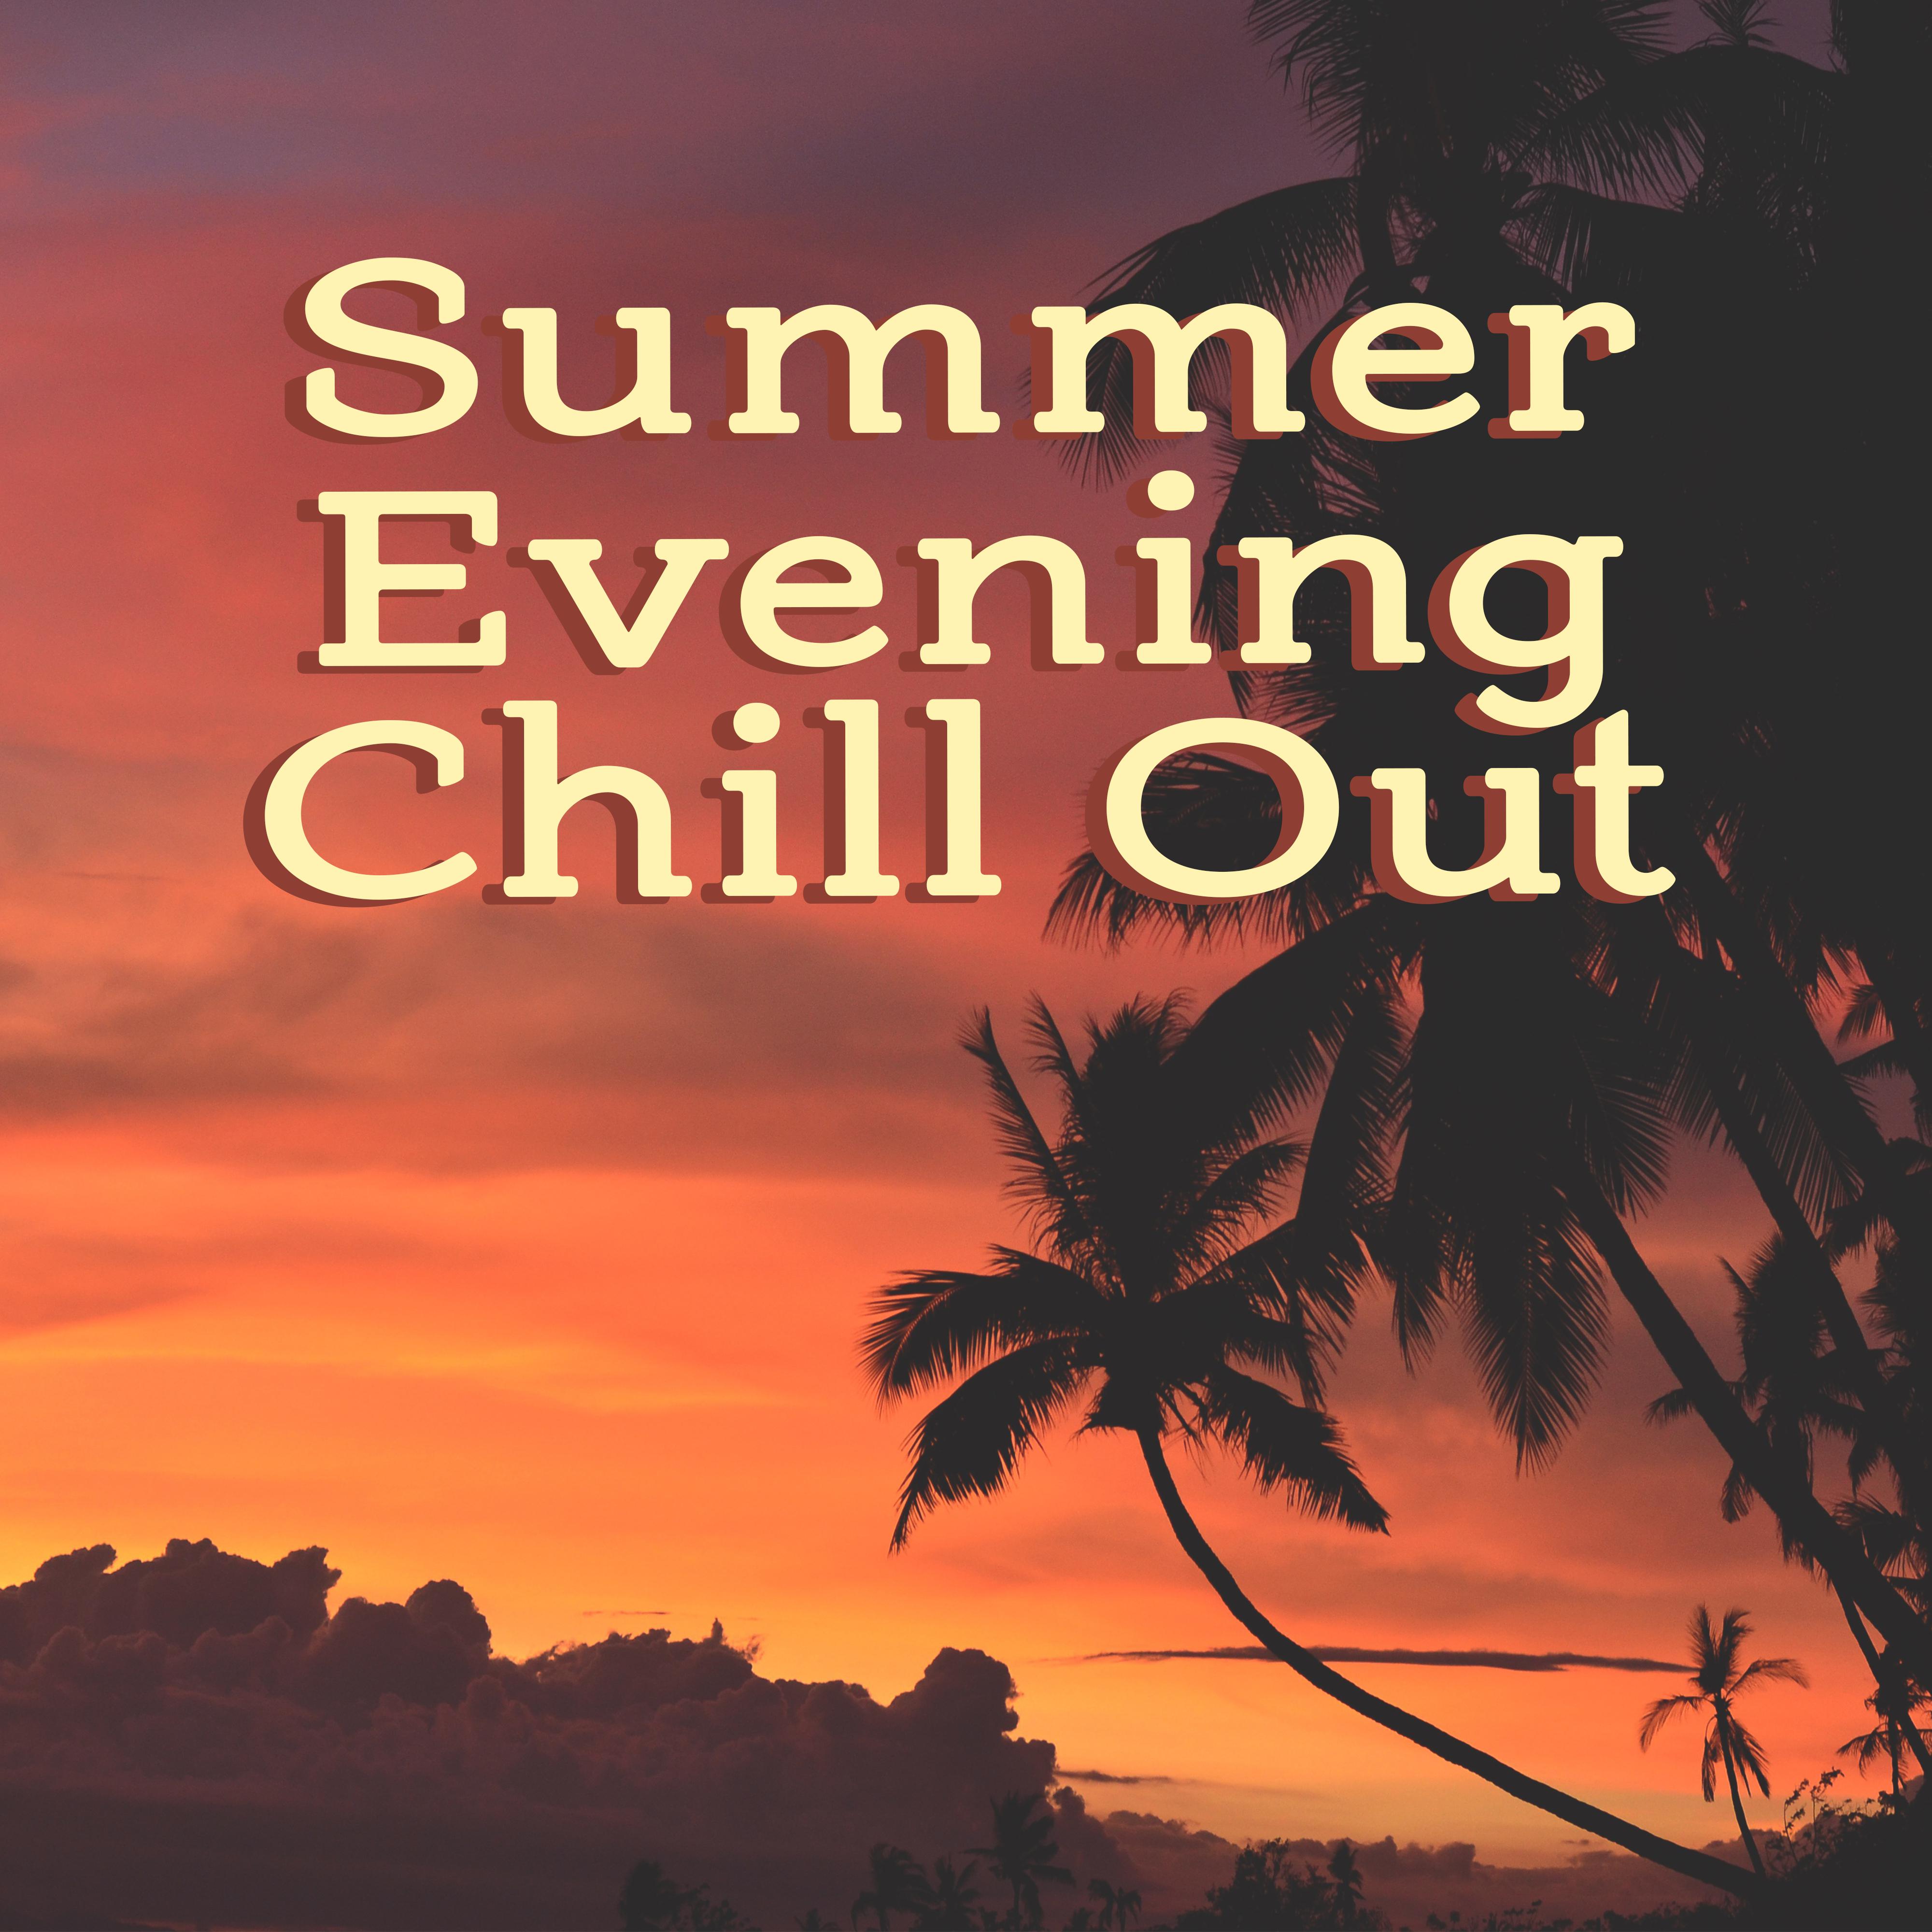 Summer Evening Chill Out – Late Night Walk, Holiday Journey, Chill Out Vibes, Beach Lounge